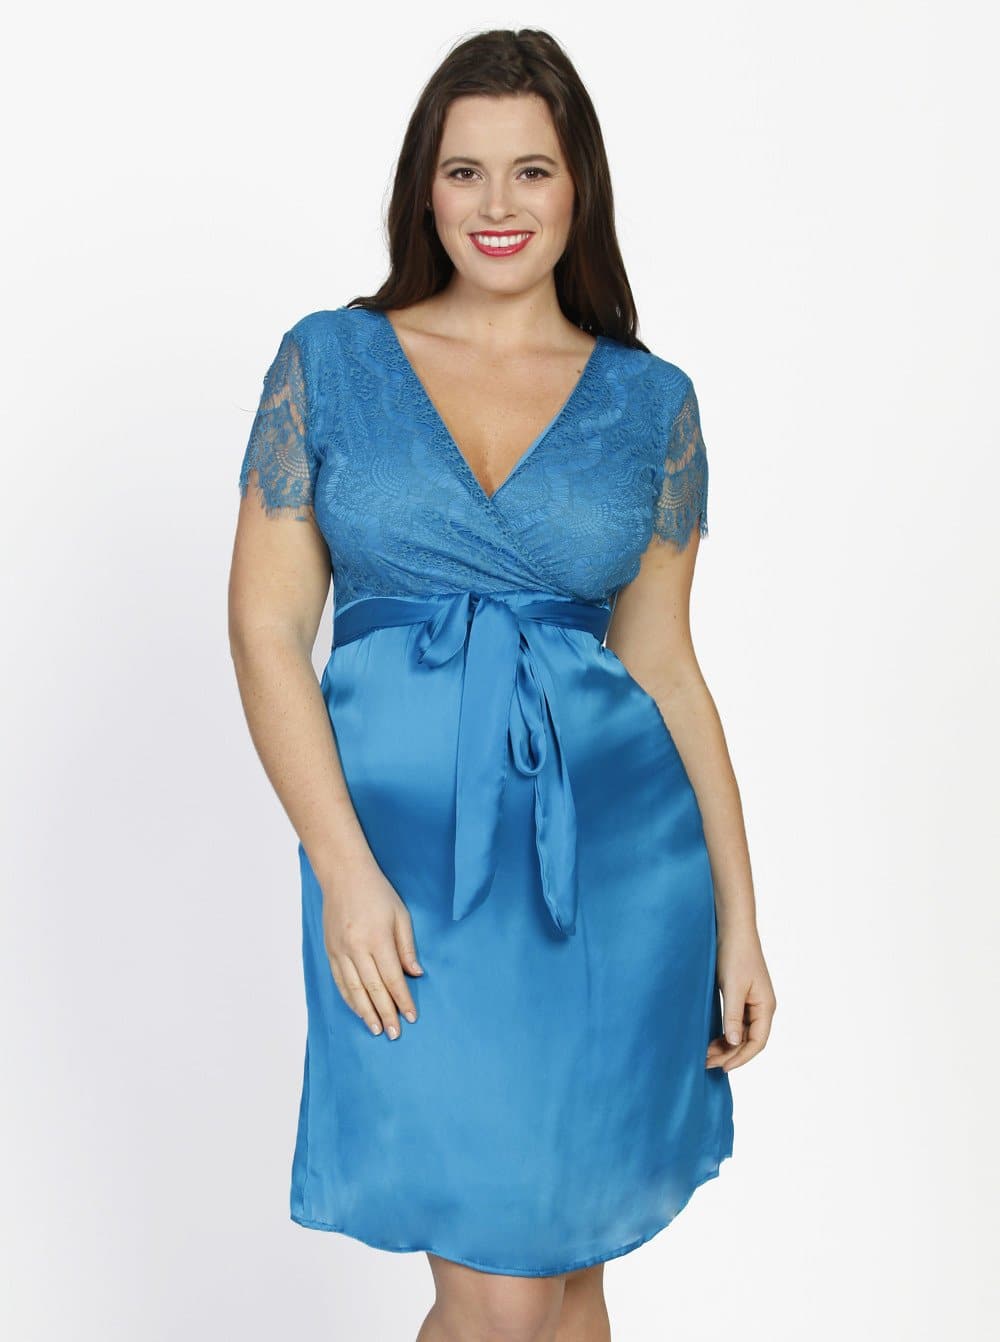 Maternity Mid Length Lace Party Dress - Teal - Angel Maternity - Maternity clothes - shop online (10007714182)